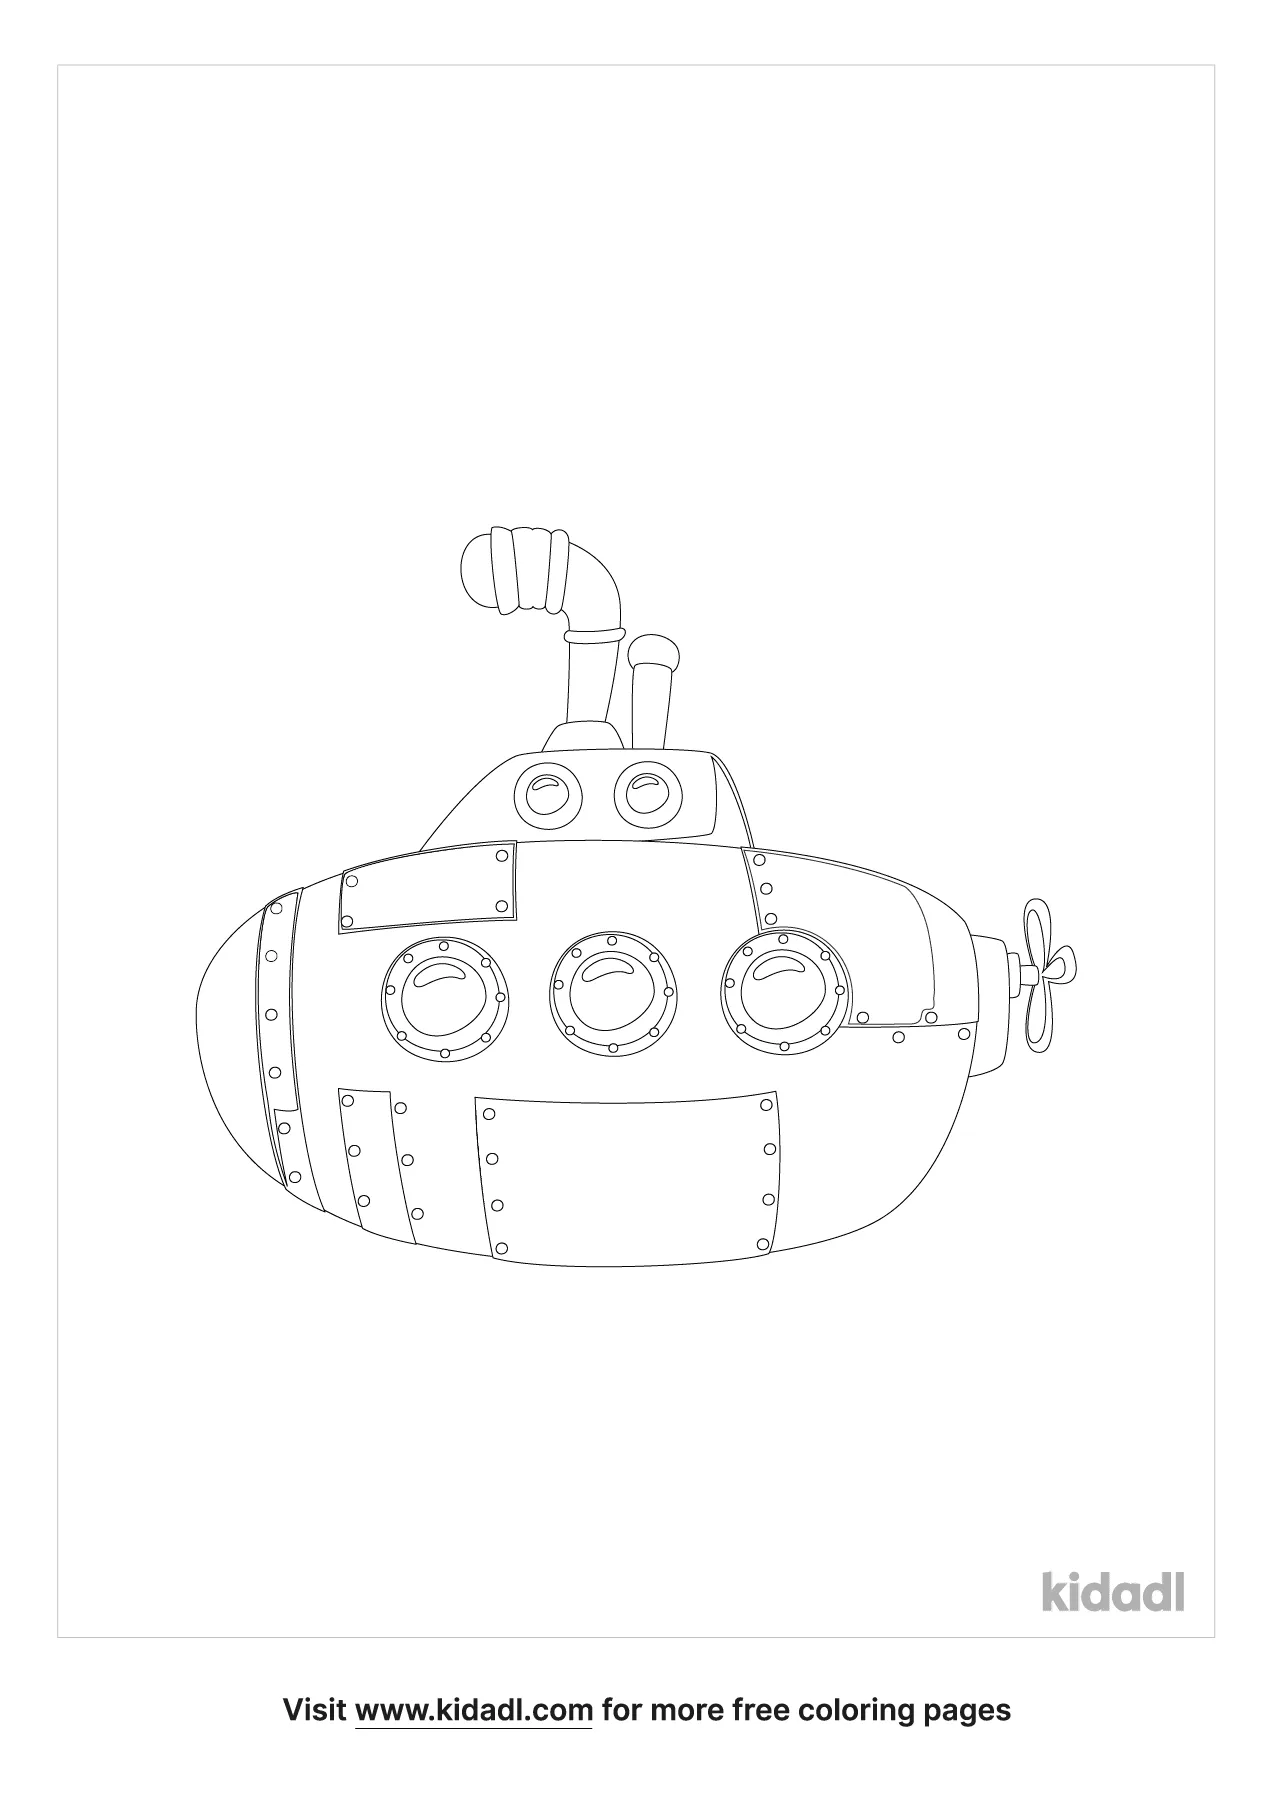 Free yellow submarine coloring page coloring page printables